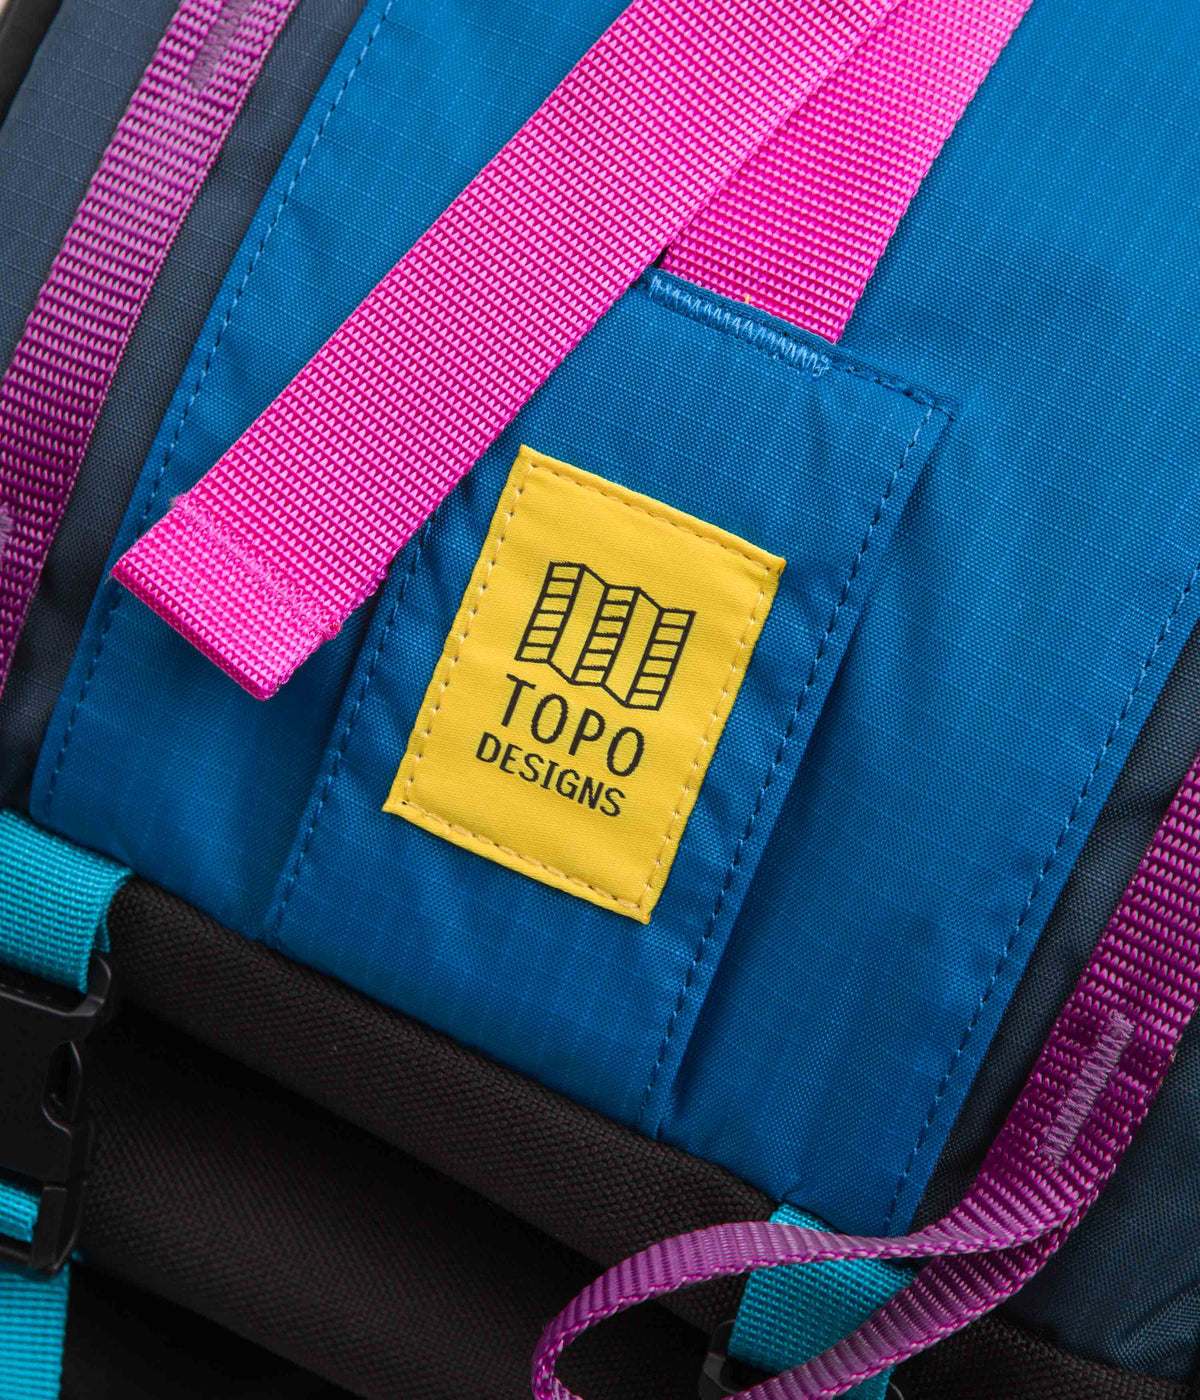 At Topo Designs, we're rooted in mountain culture and outdoor